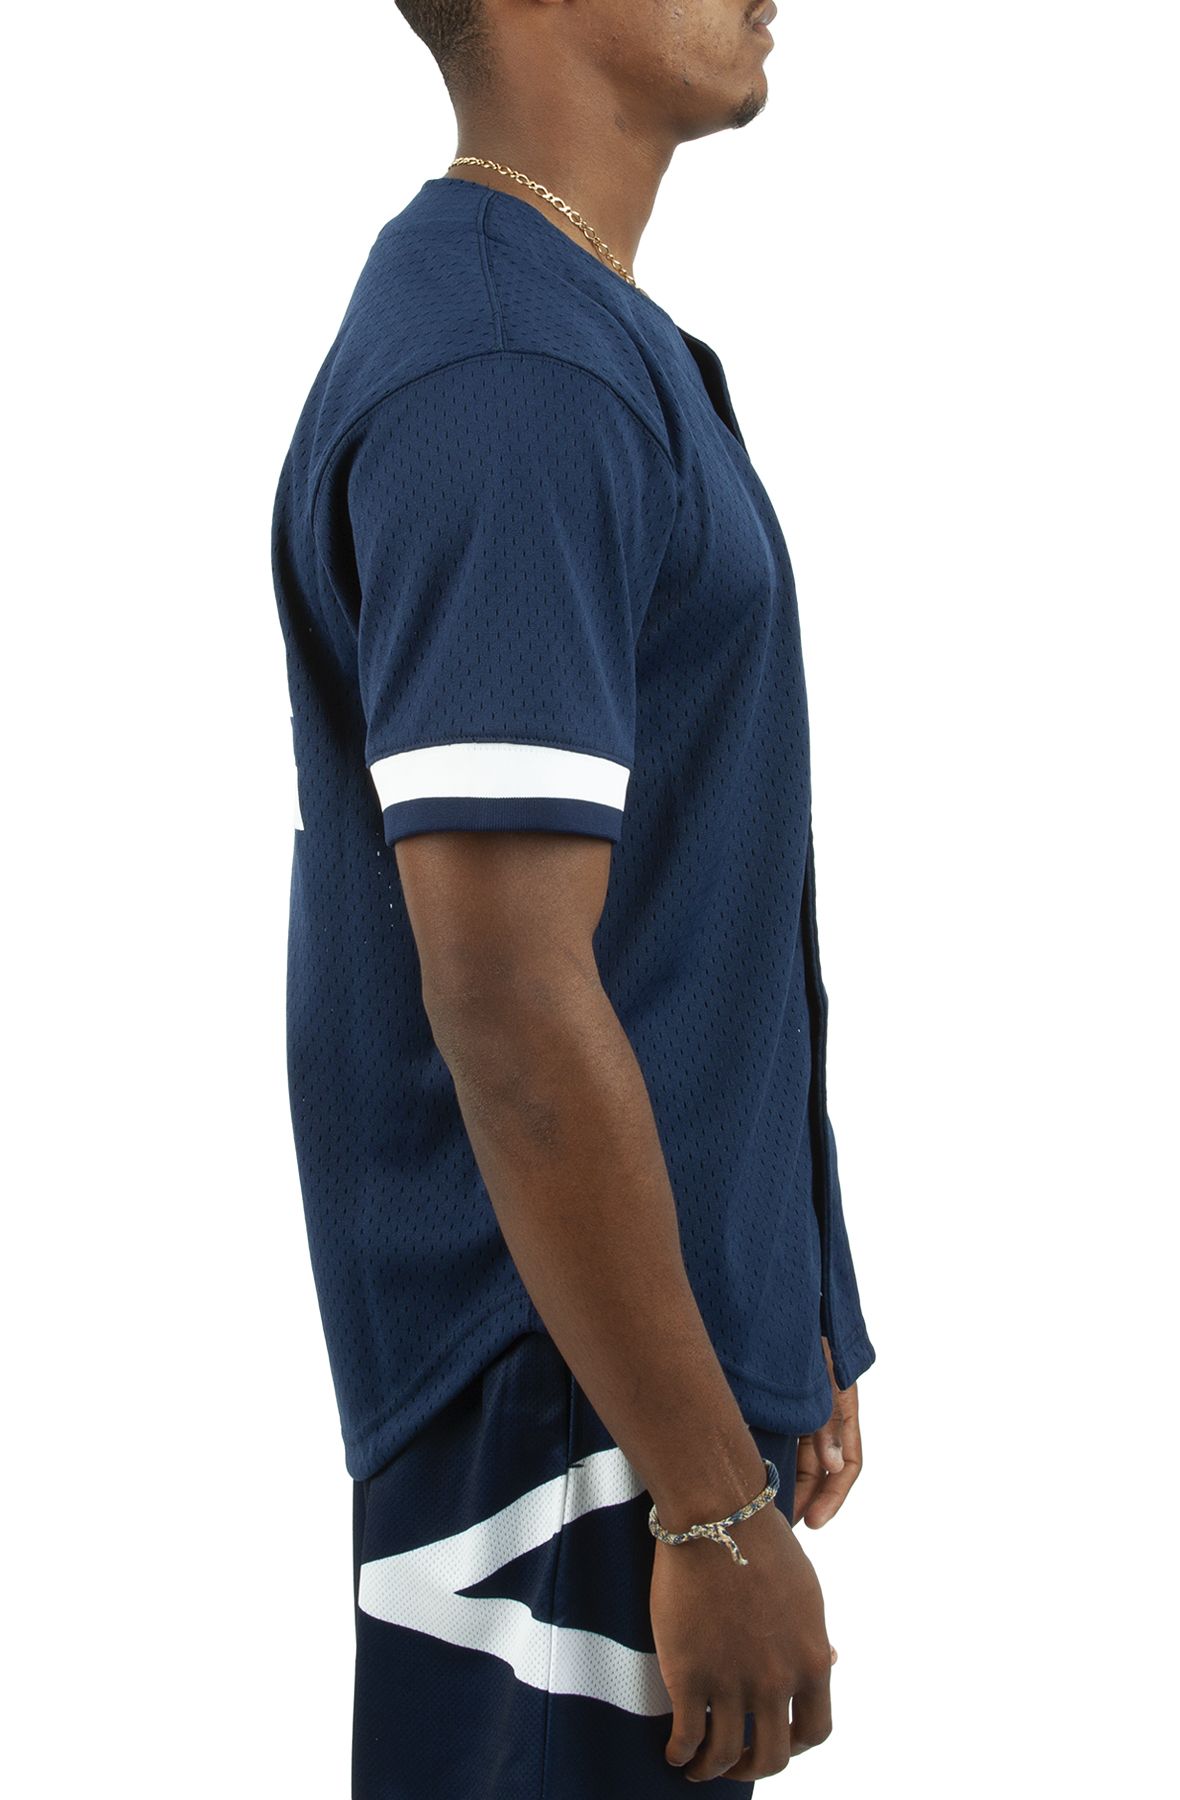 Reggie Jackson New York Yankees Mitchell & Ness Cooperstown Collection Mesh  Batting Practice Button-Up Jersey - Navy